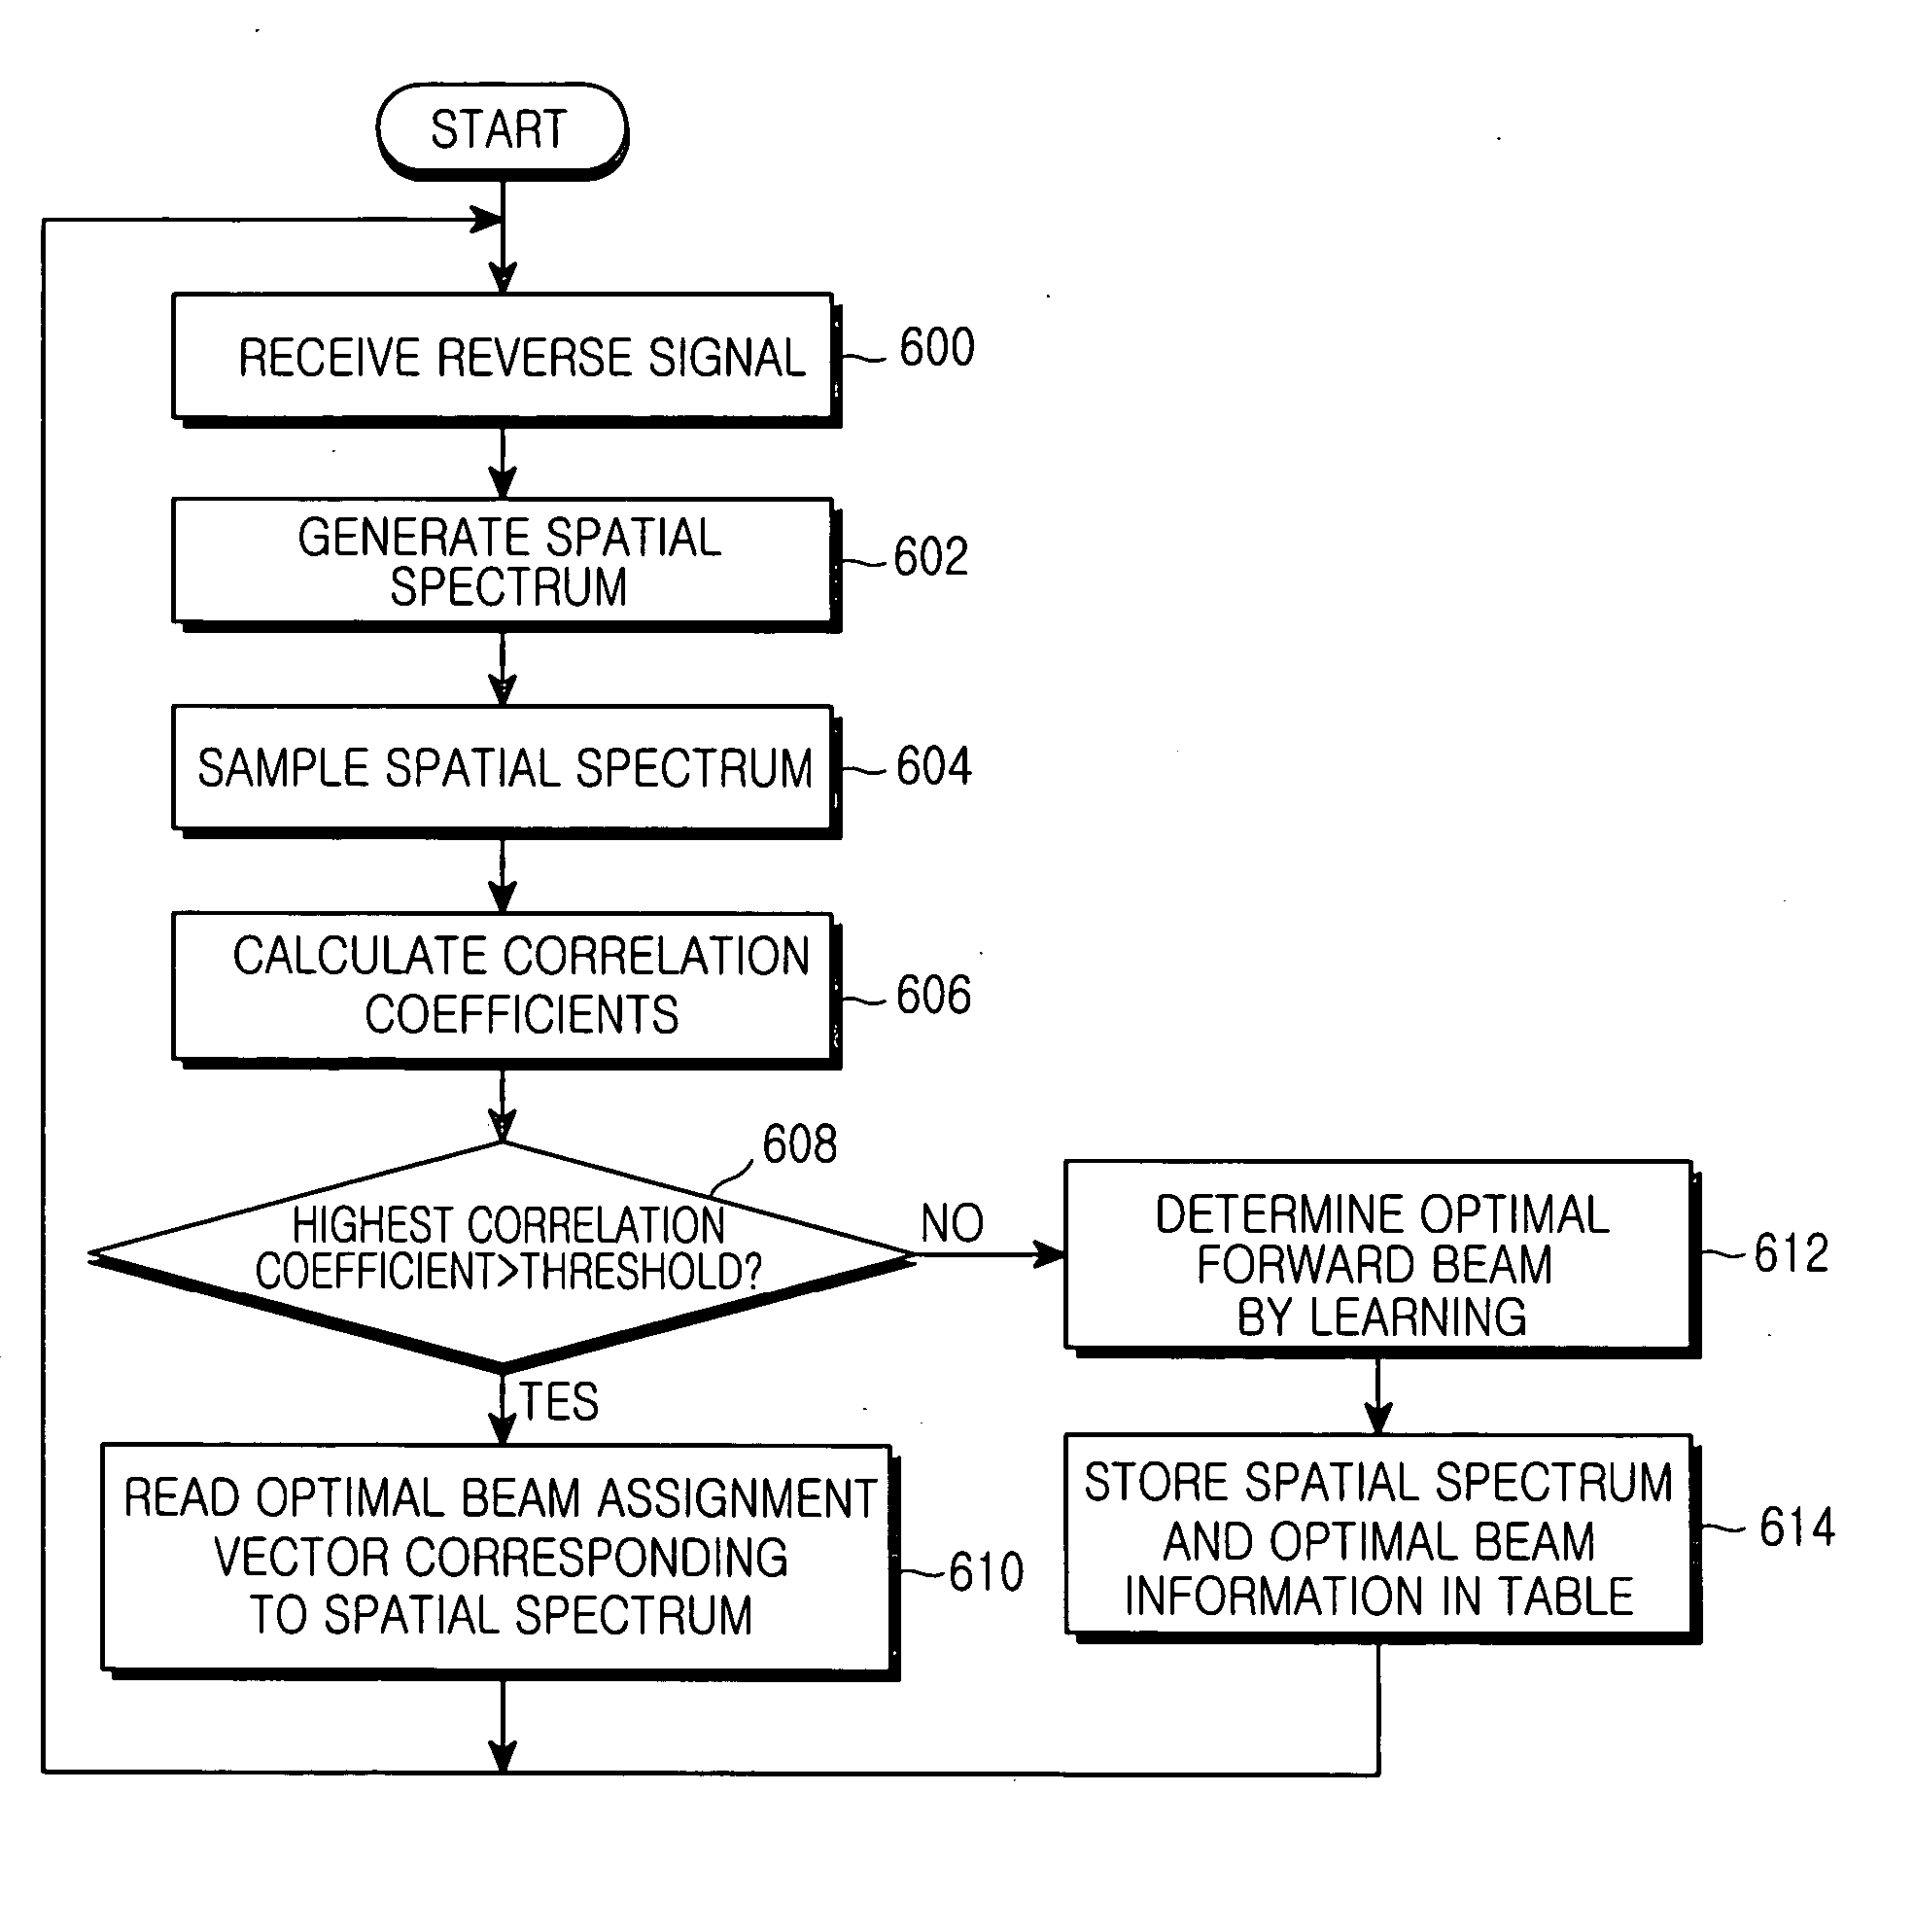 Beam assigning apparatus and method in a smart antenna system